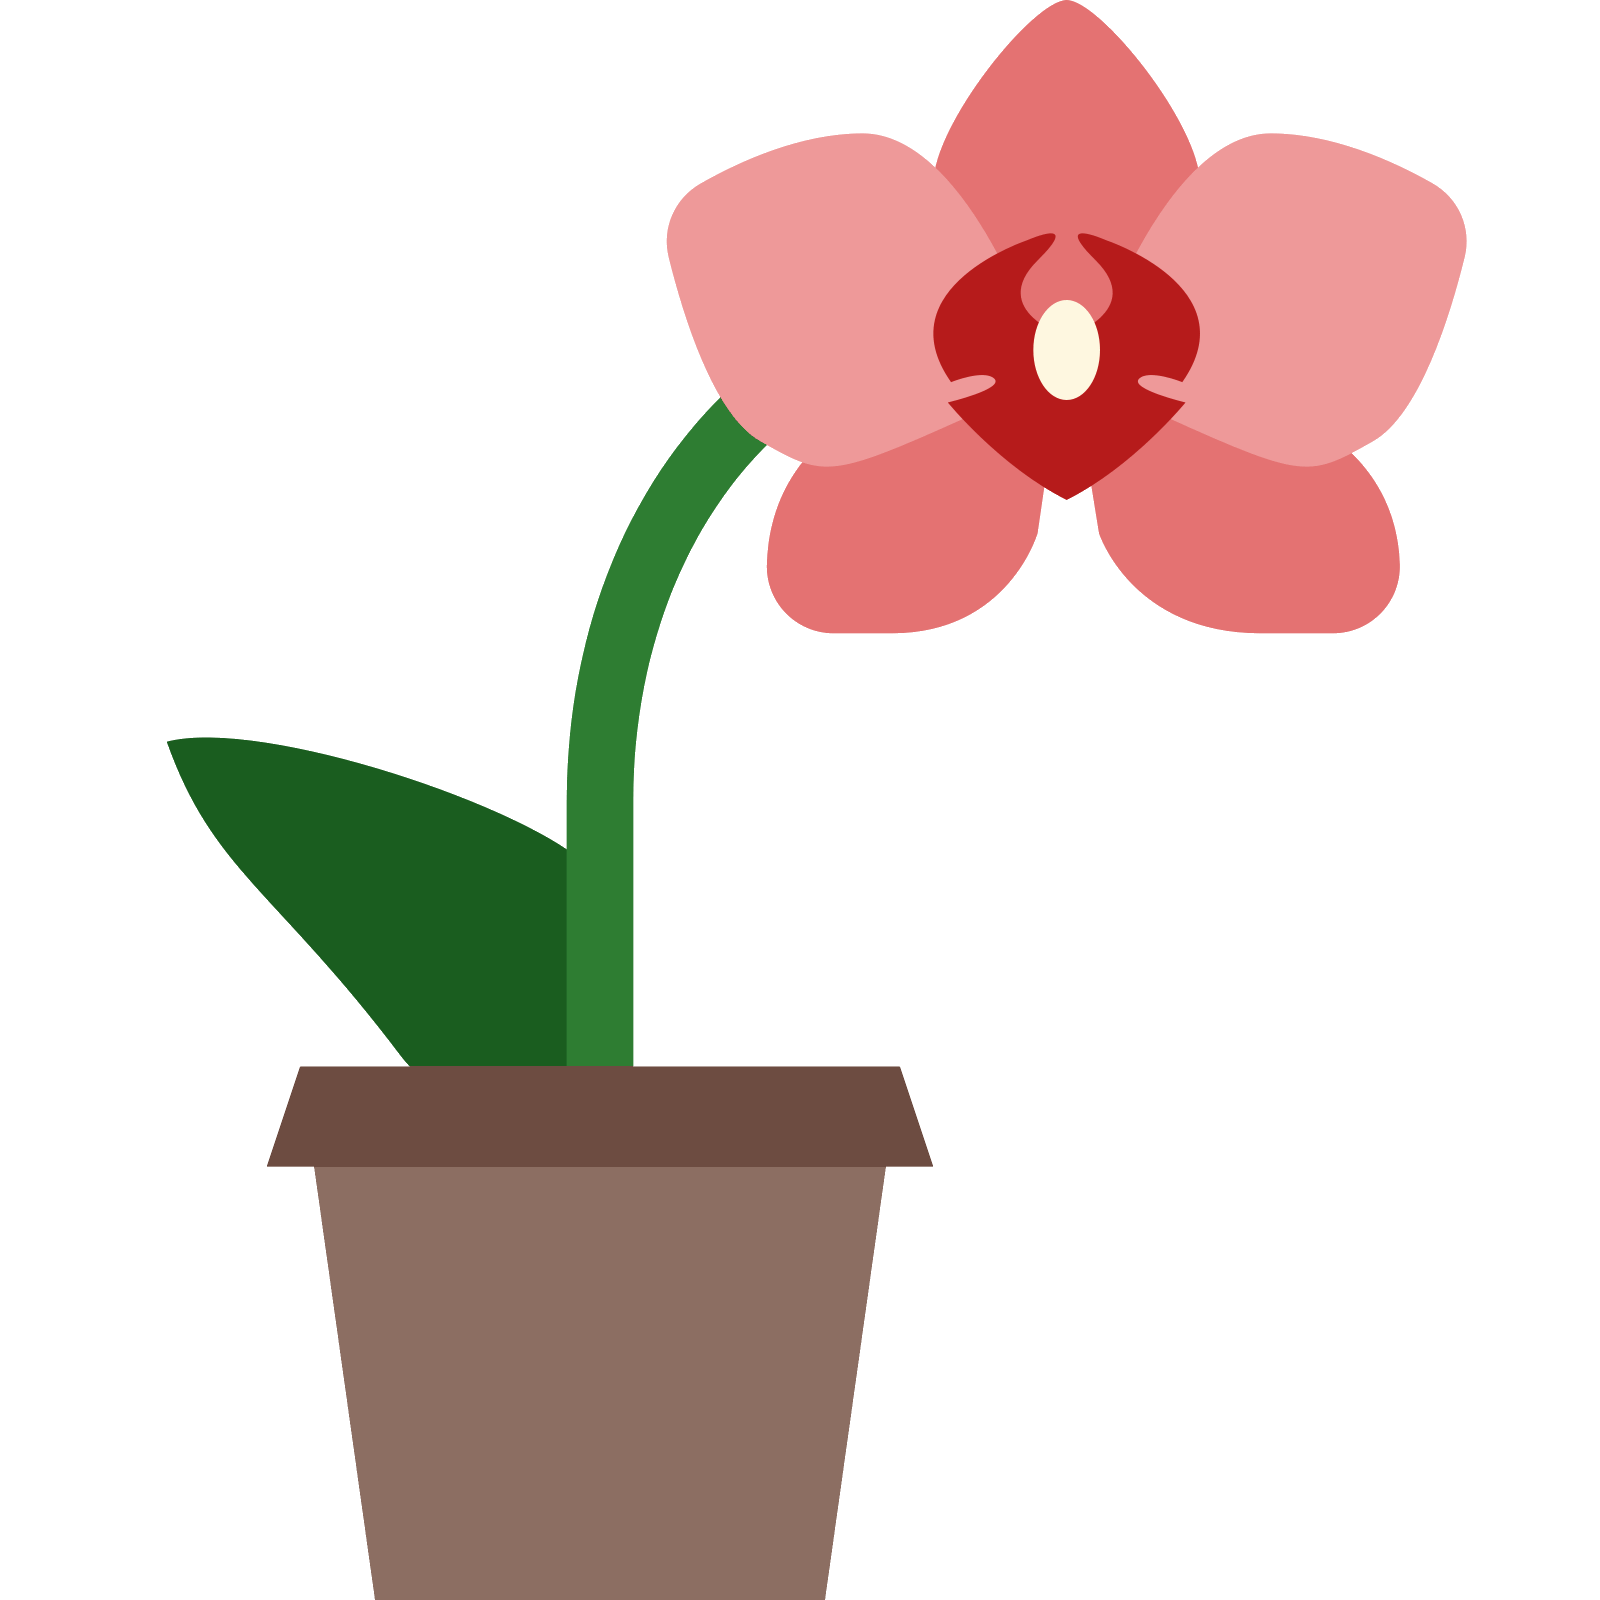 Pink orchid icon cartoon style Royalty Free Vector Image